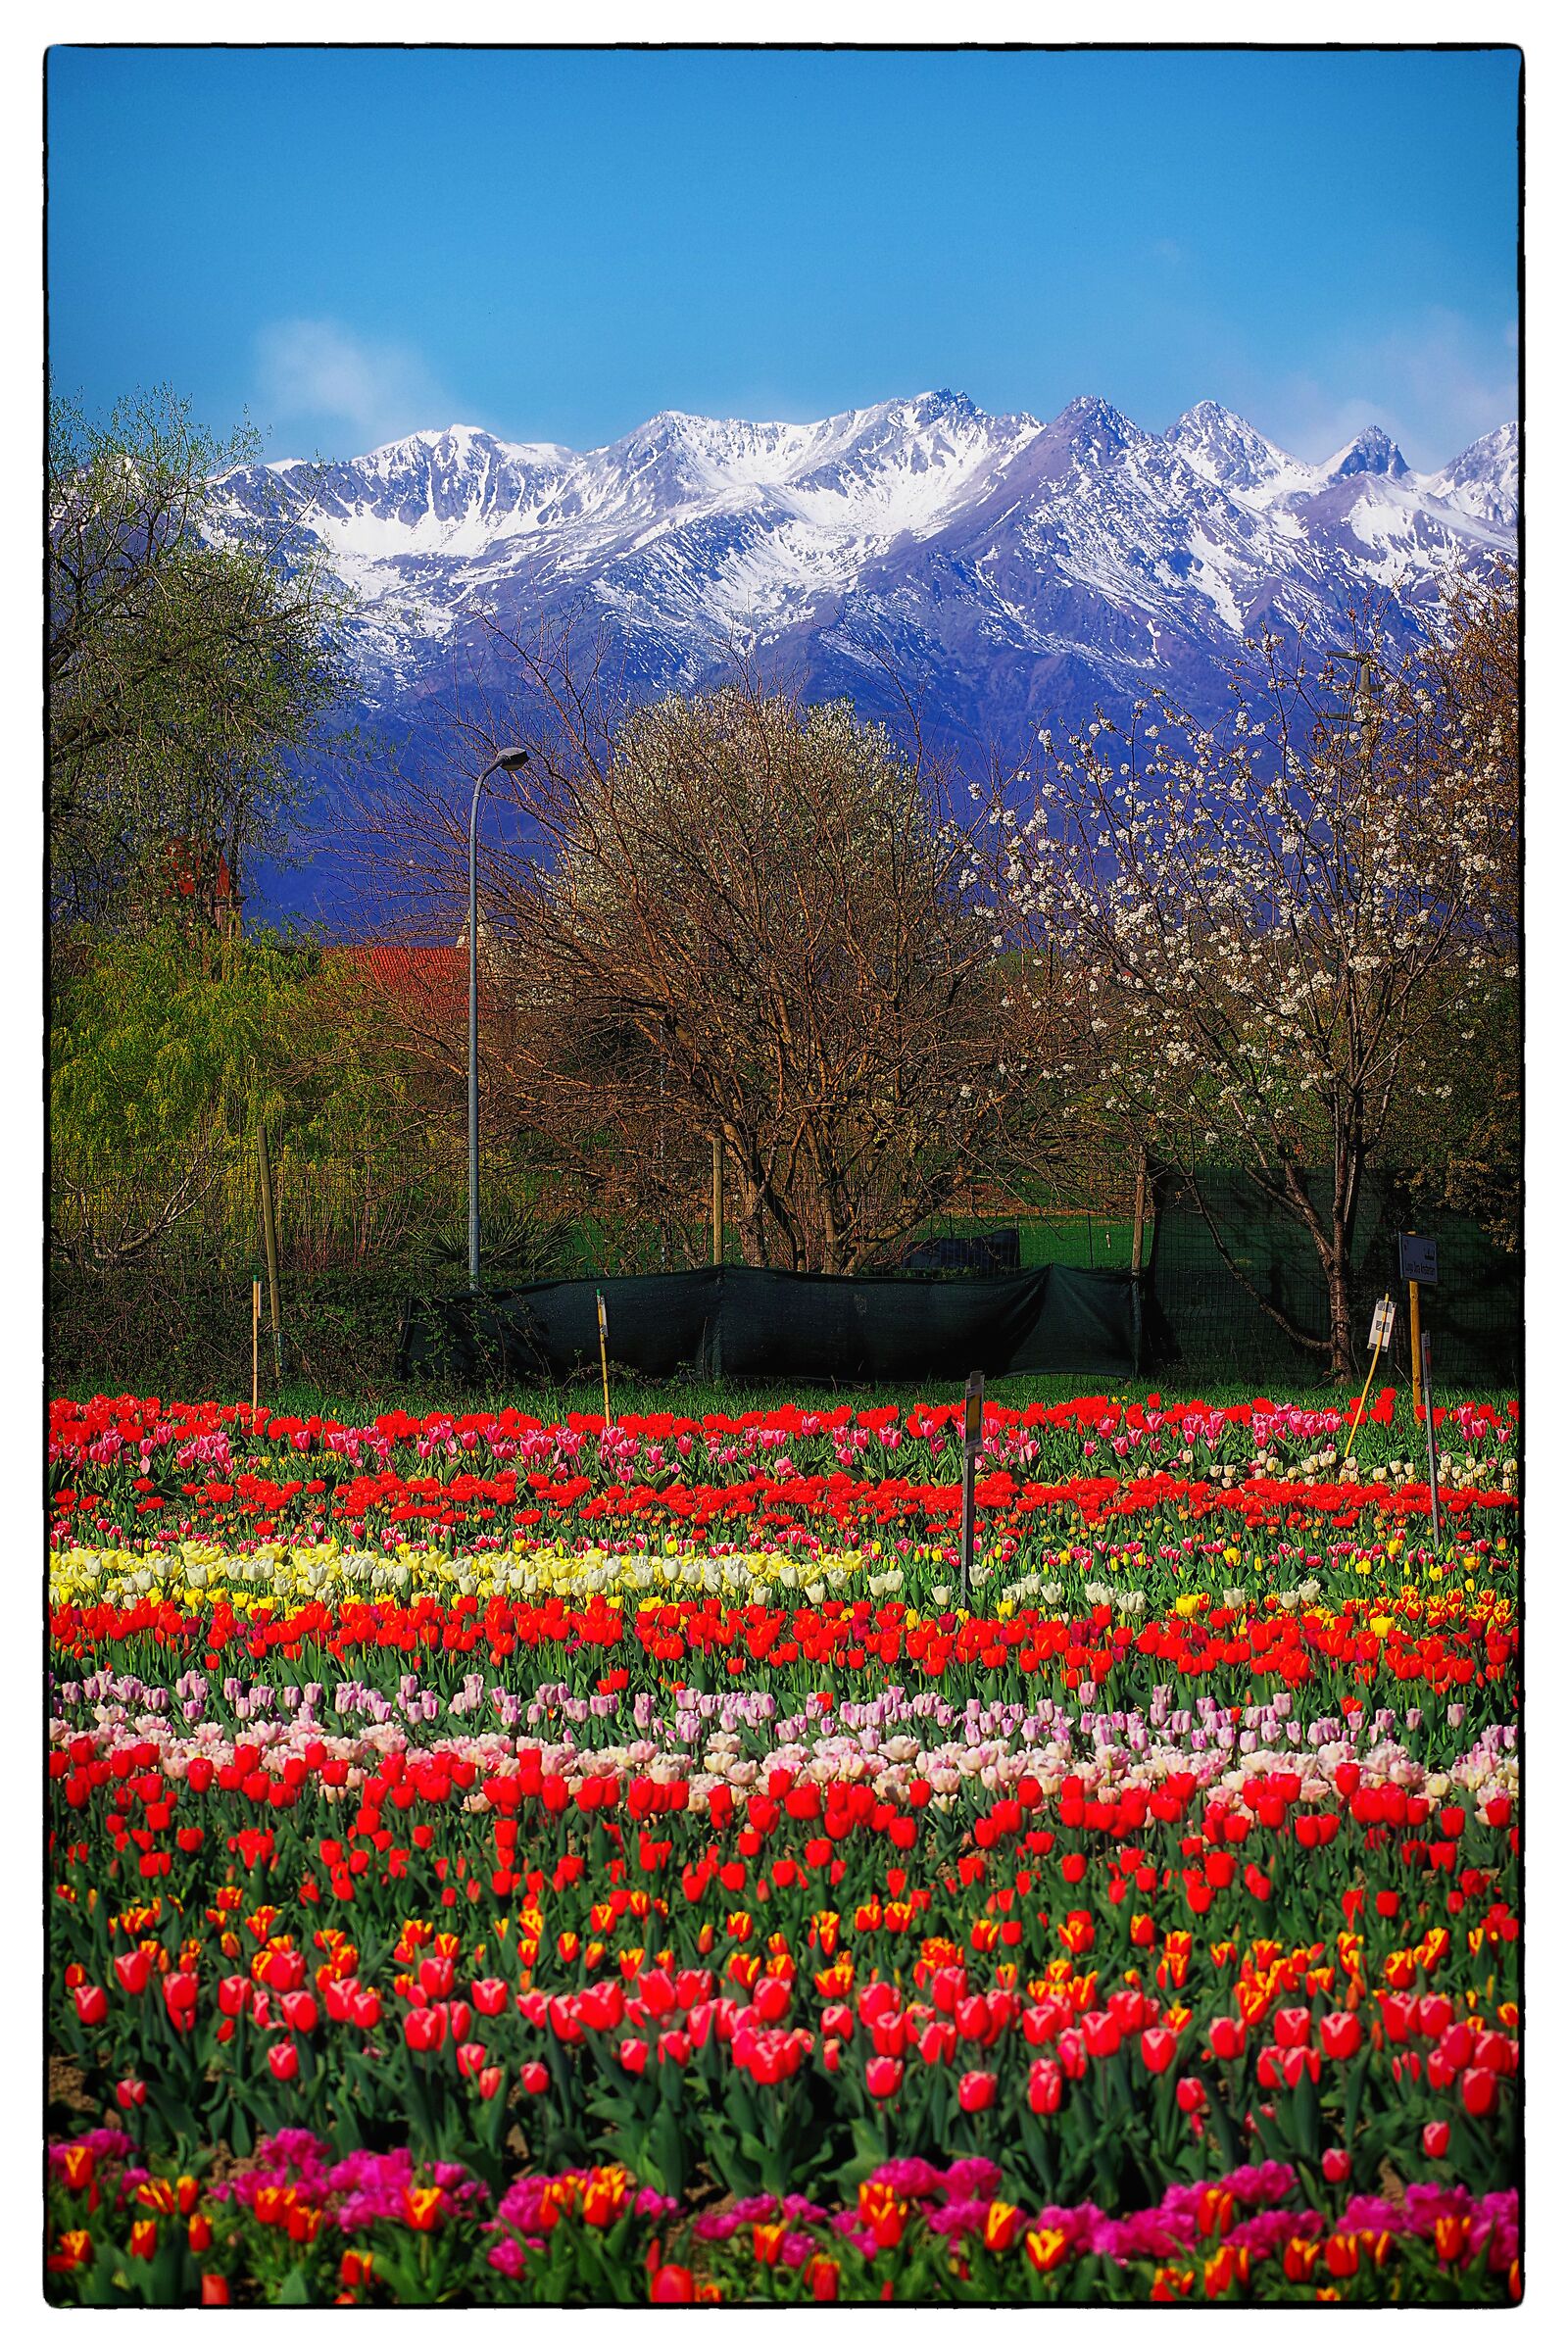 Tulips and mountains...